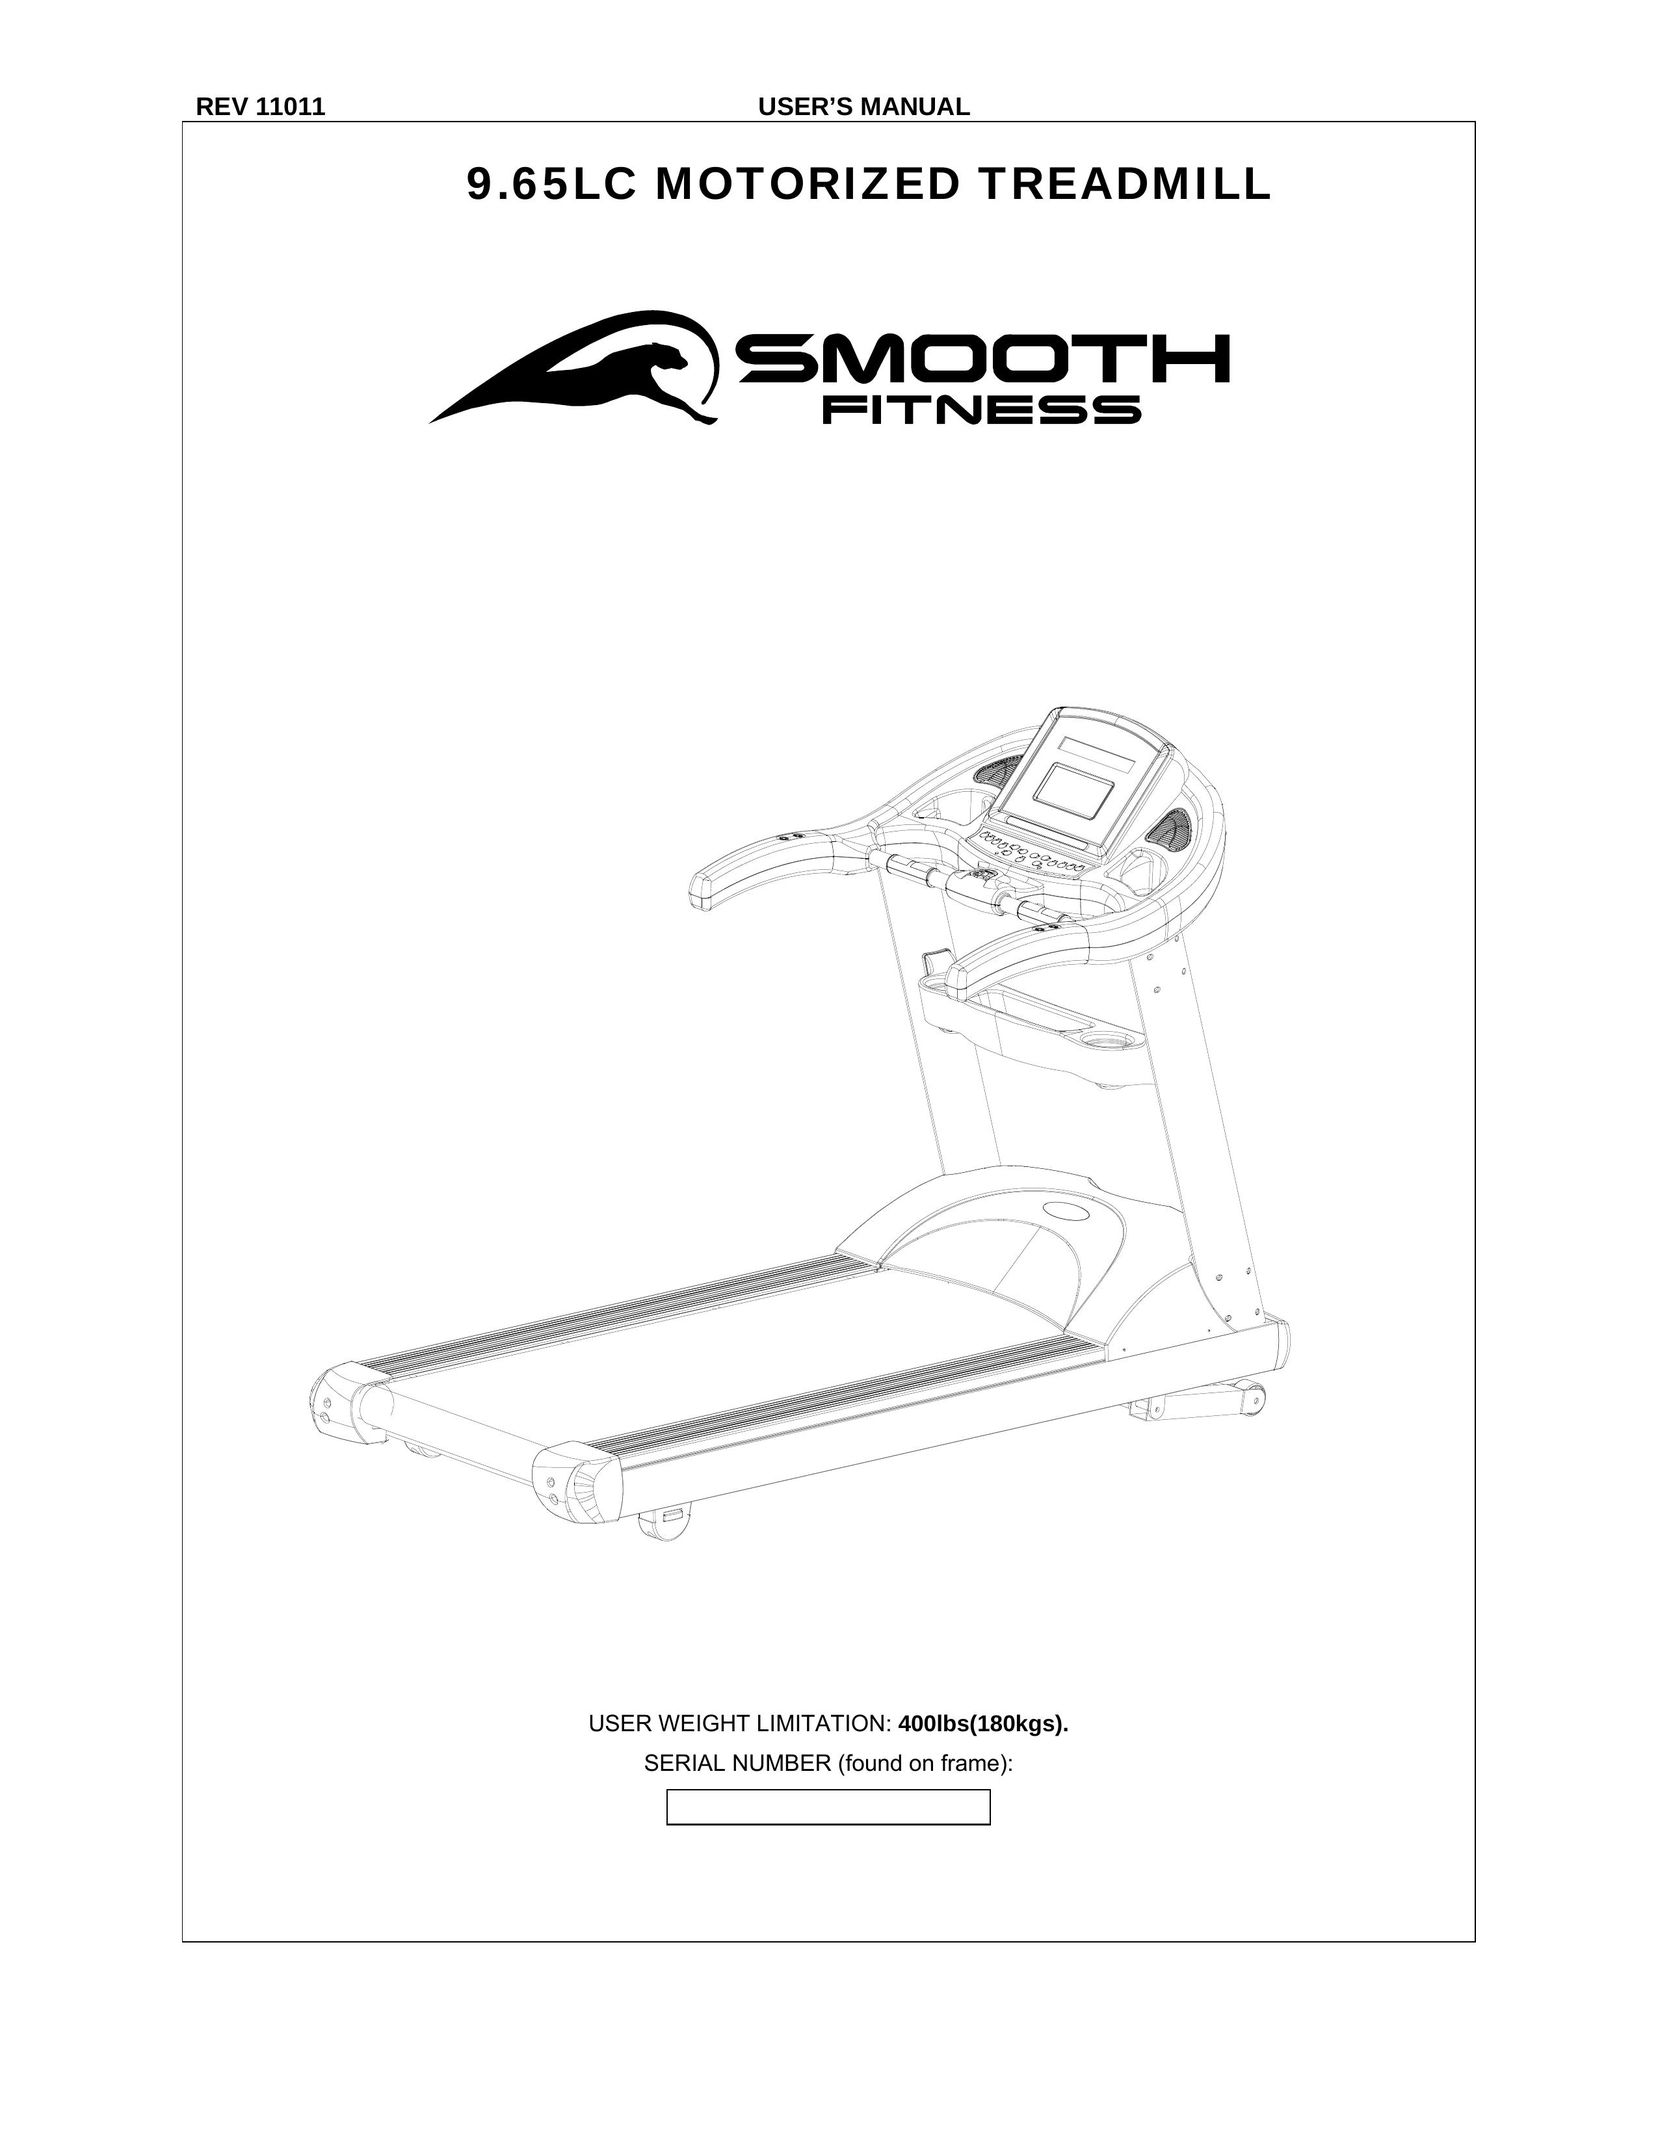 Smooth Fitness 9.65LC Treadmill User Manual